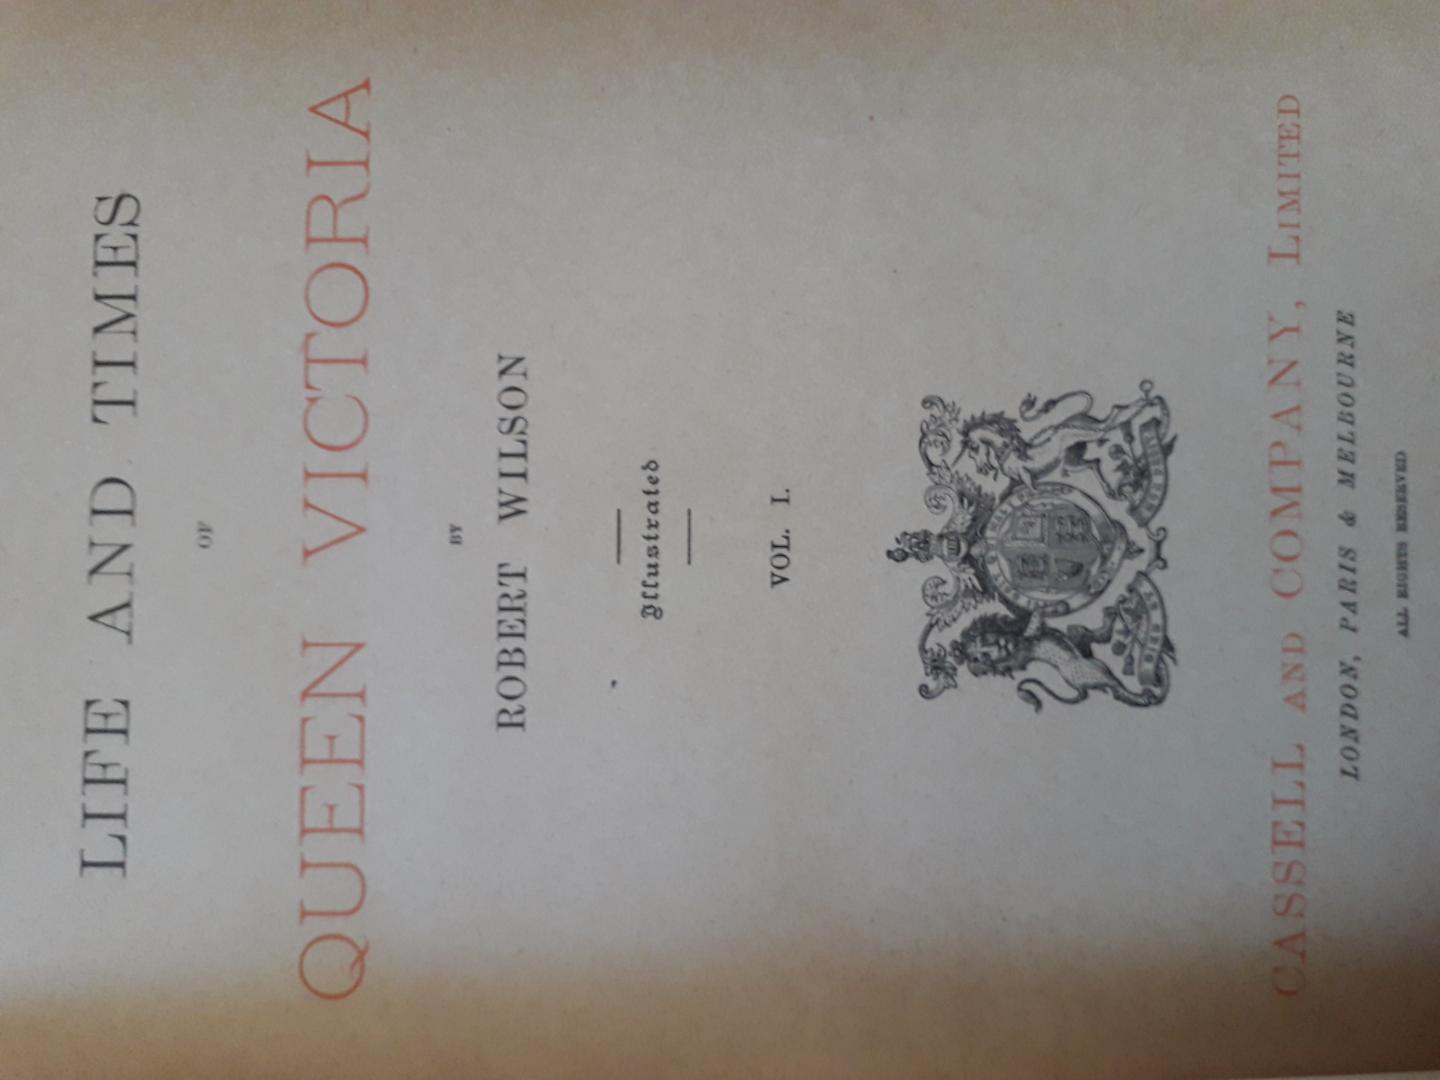 Wilson, Robert - The life and times of Queen Victoria